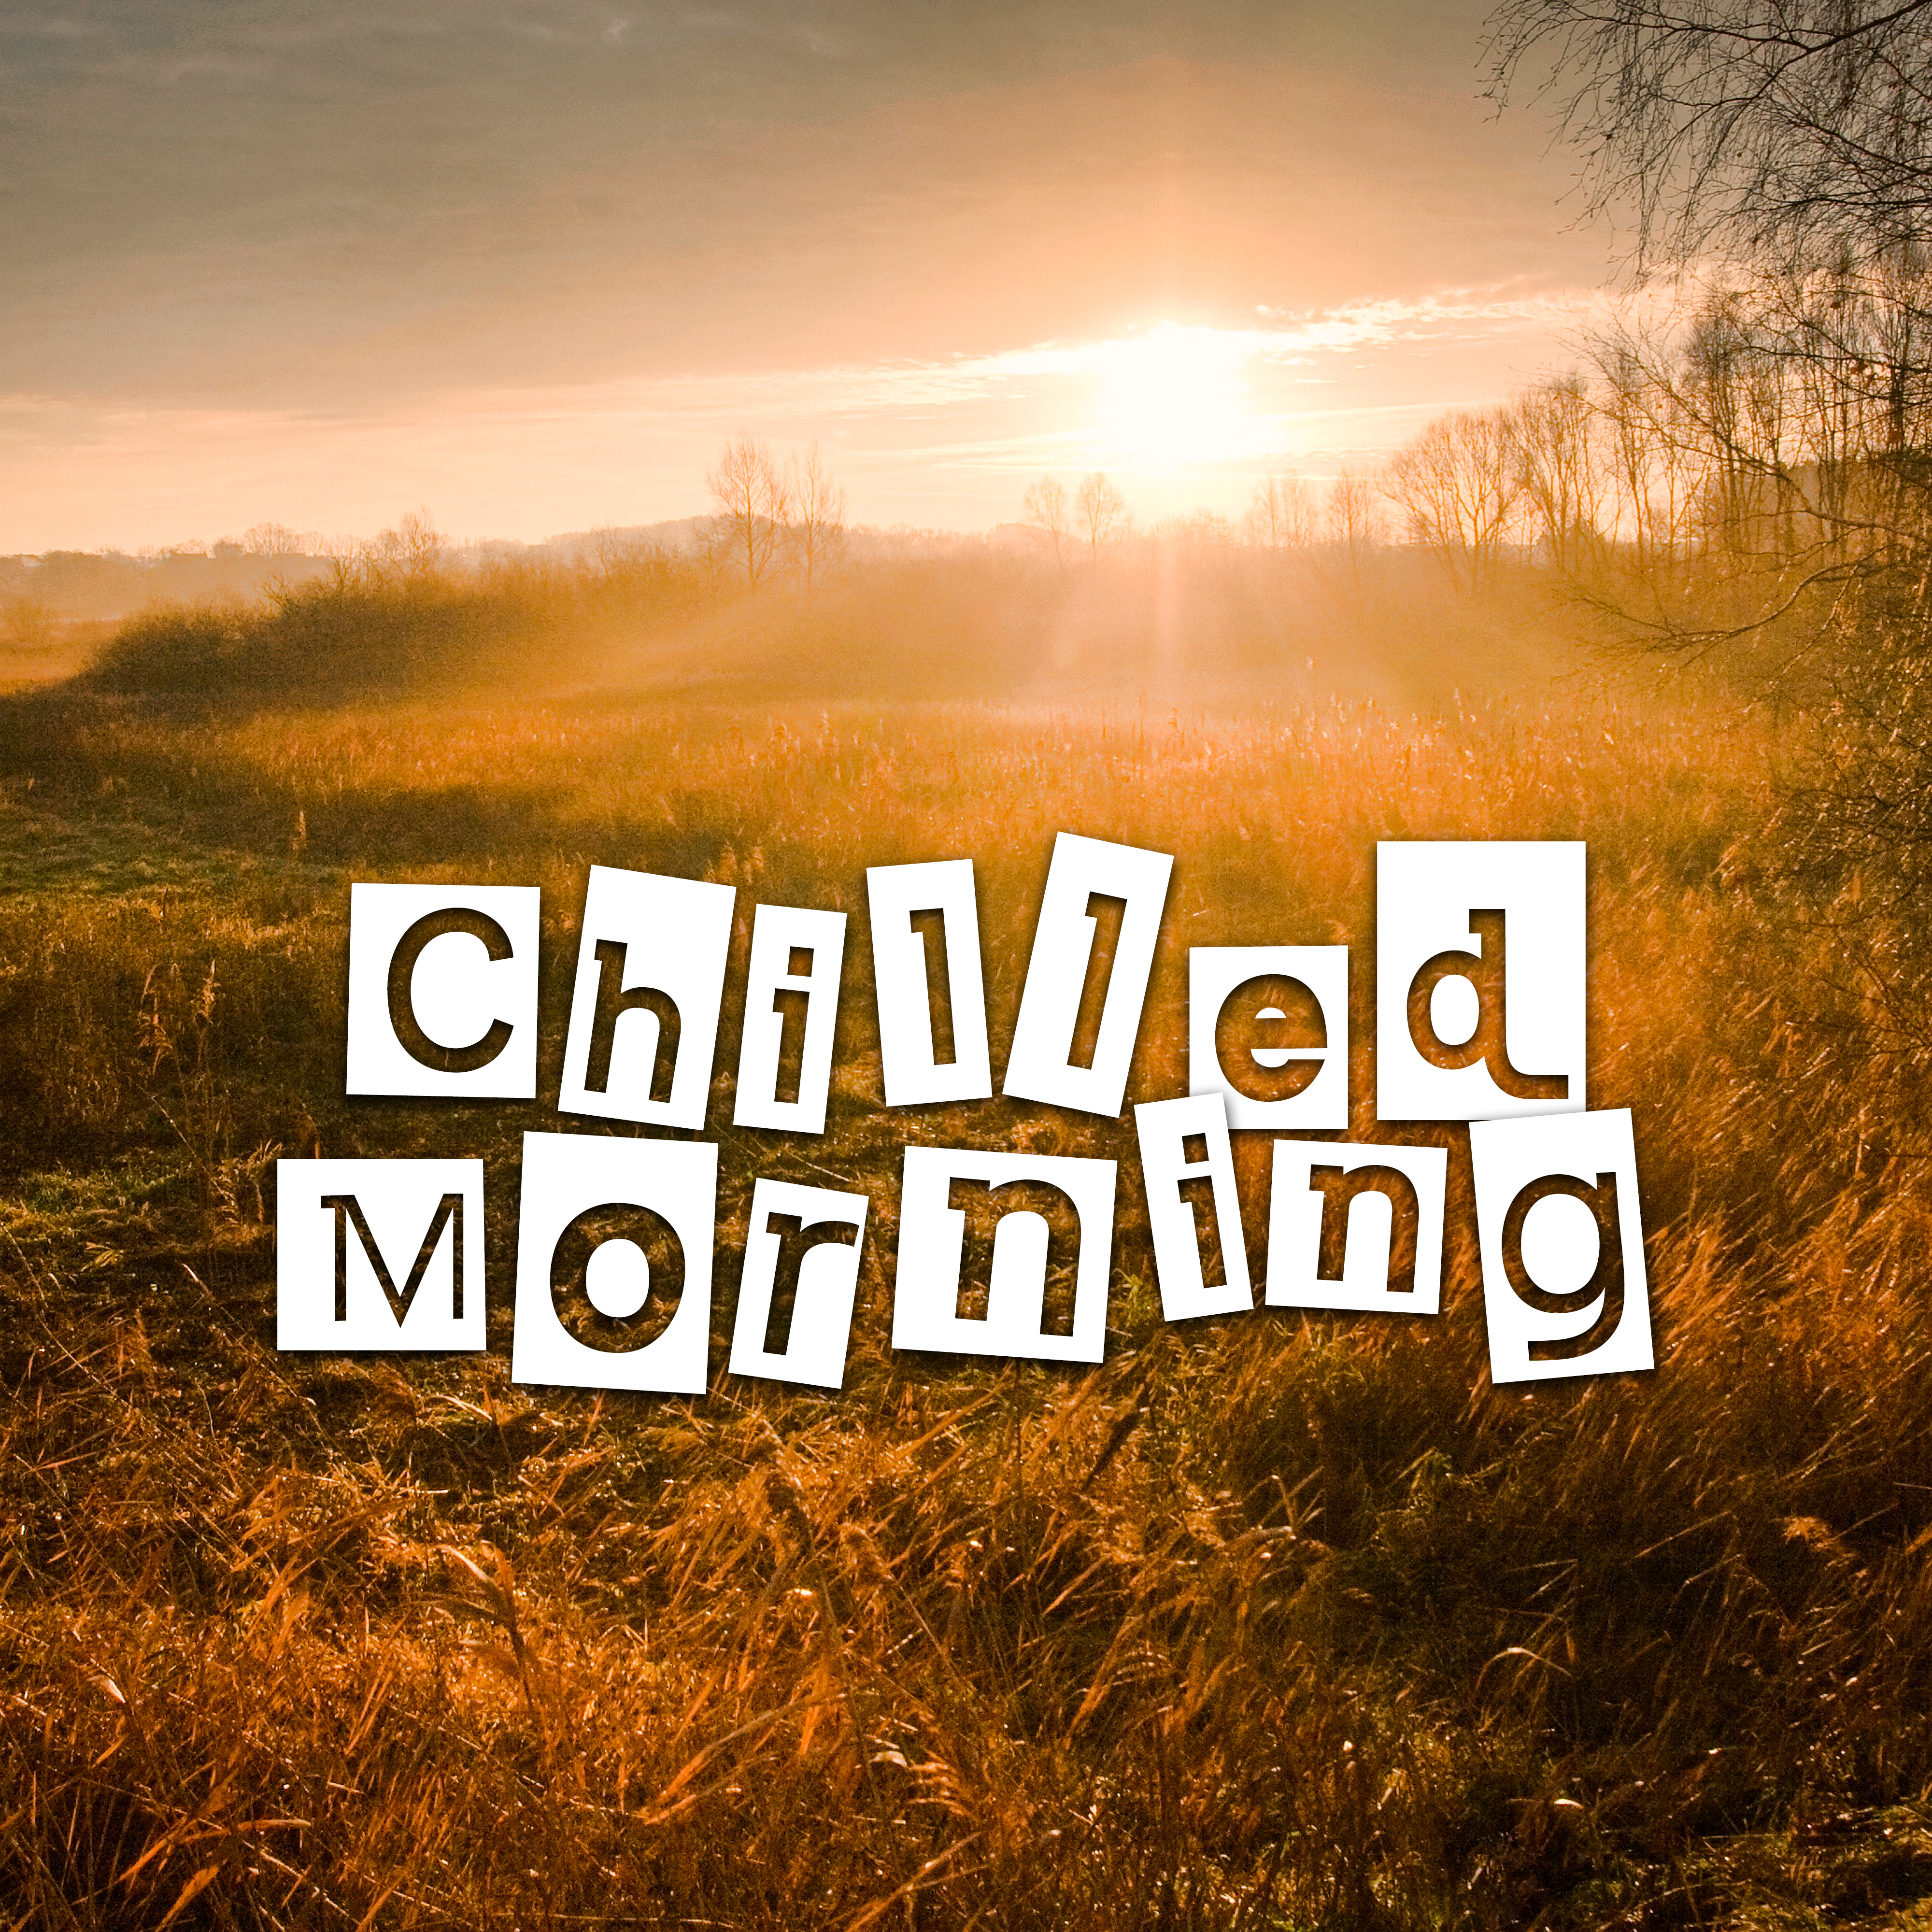 Chilled Morning  Early Sunrise Chill Out, Music for Summer, Holiday Journey, Sun  Sand